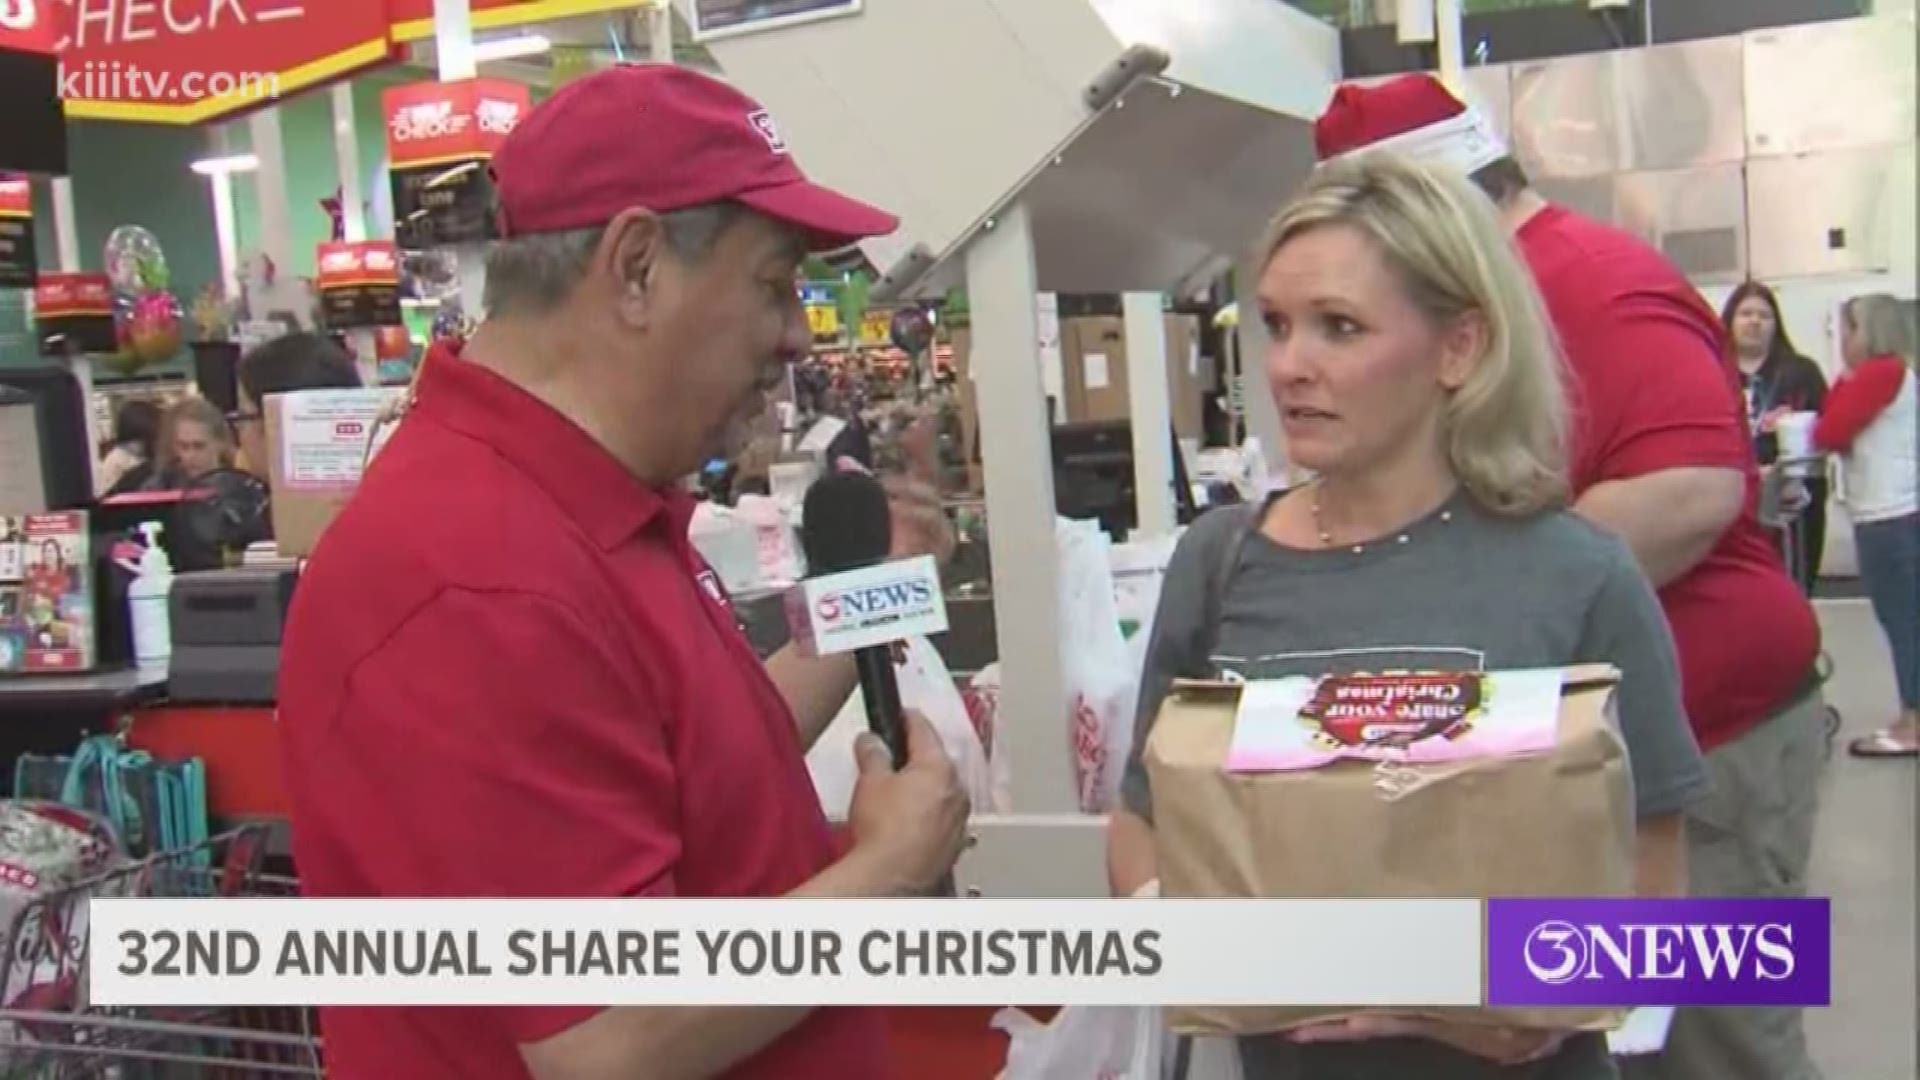 KIII-TV joined with H-E-B yet again Friday for the annual Share Your Christmas Food Drive benefiting the Coastal Bend Food Bank.